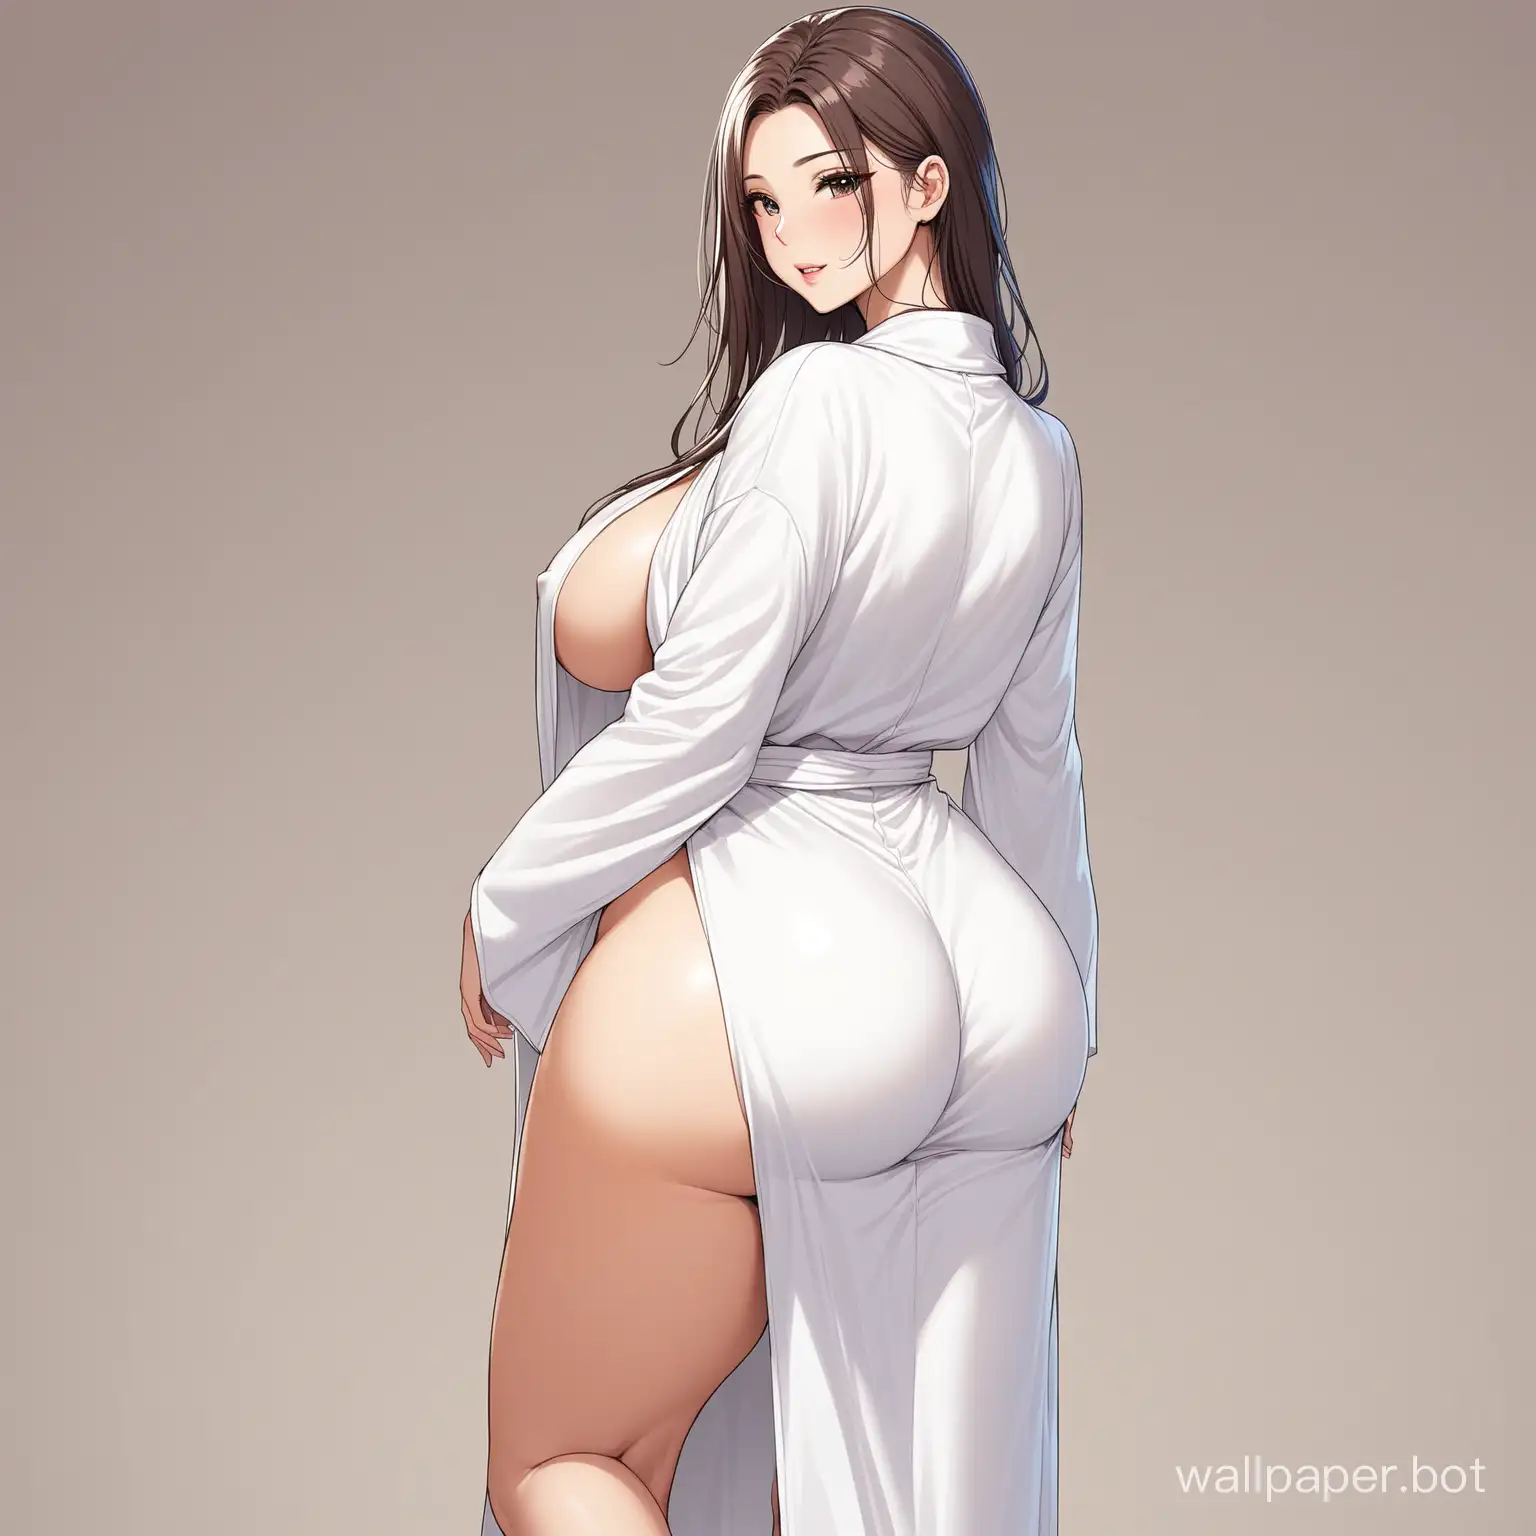 Sensuous-Woman-in-Elegant-White-Robe-with-Curvaceous-Figure